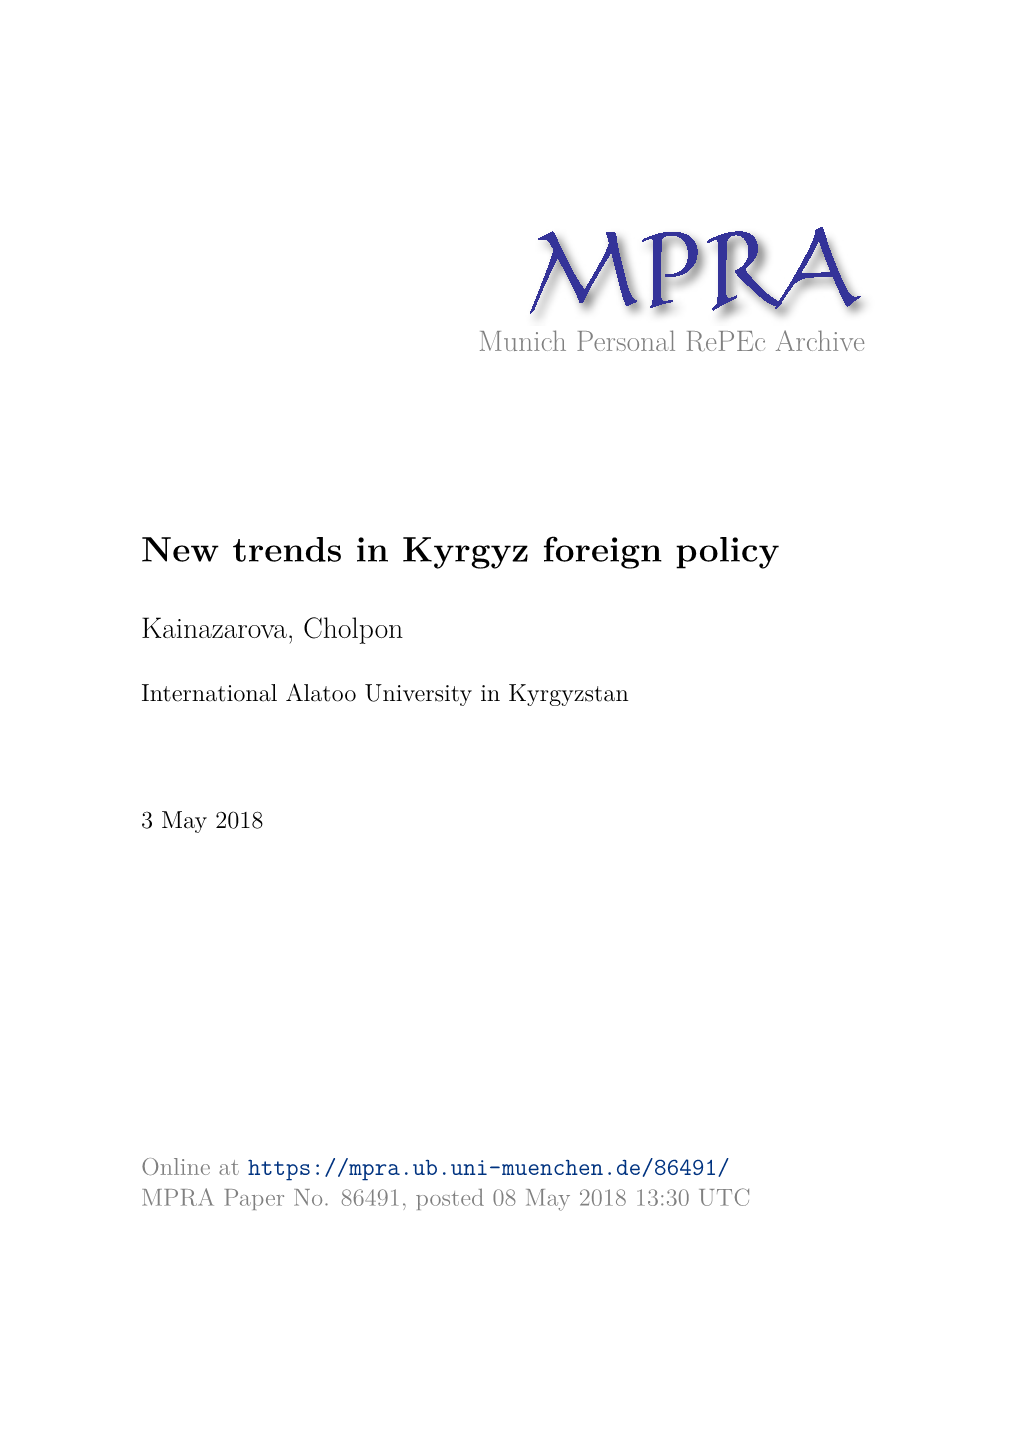 New Trends in Kyrgyz Foreign Policy